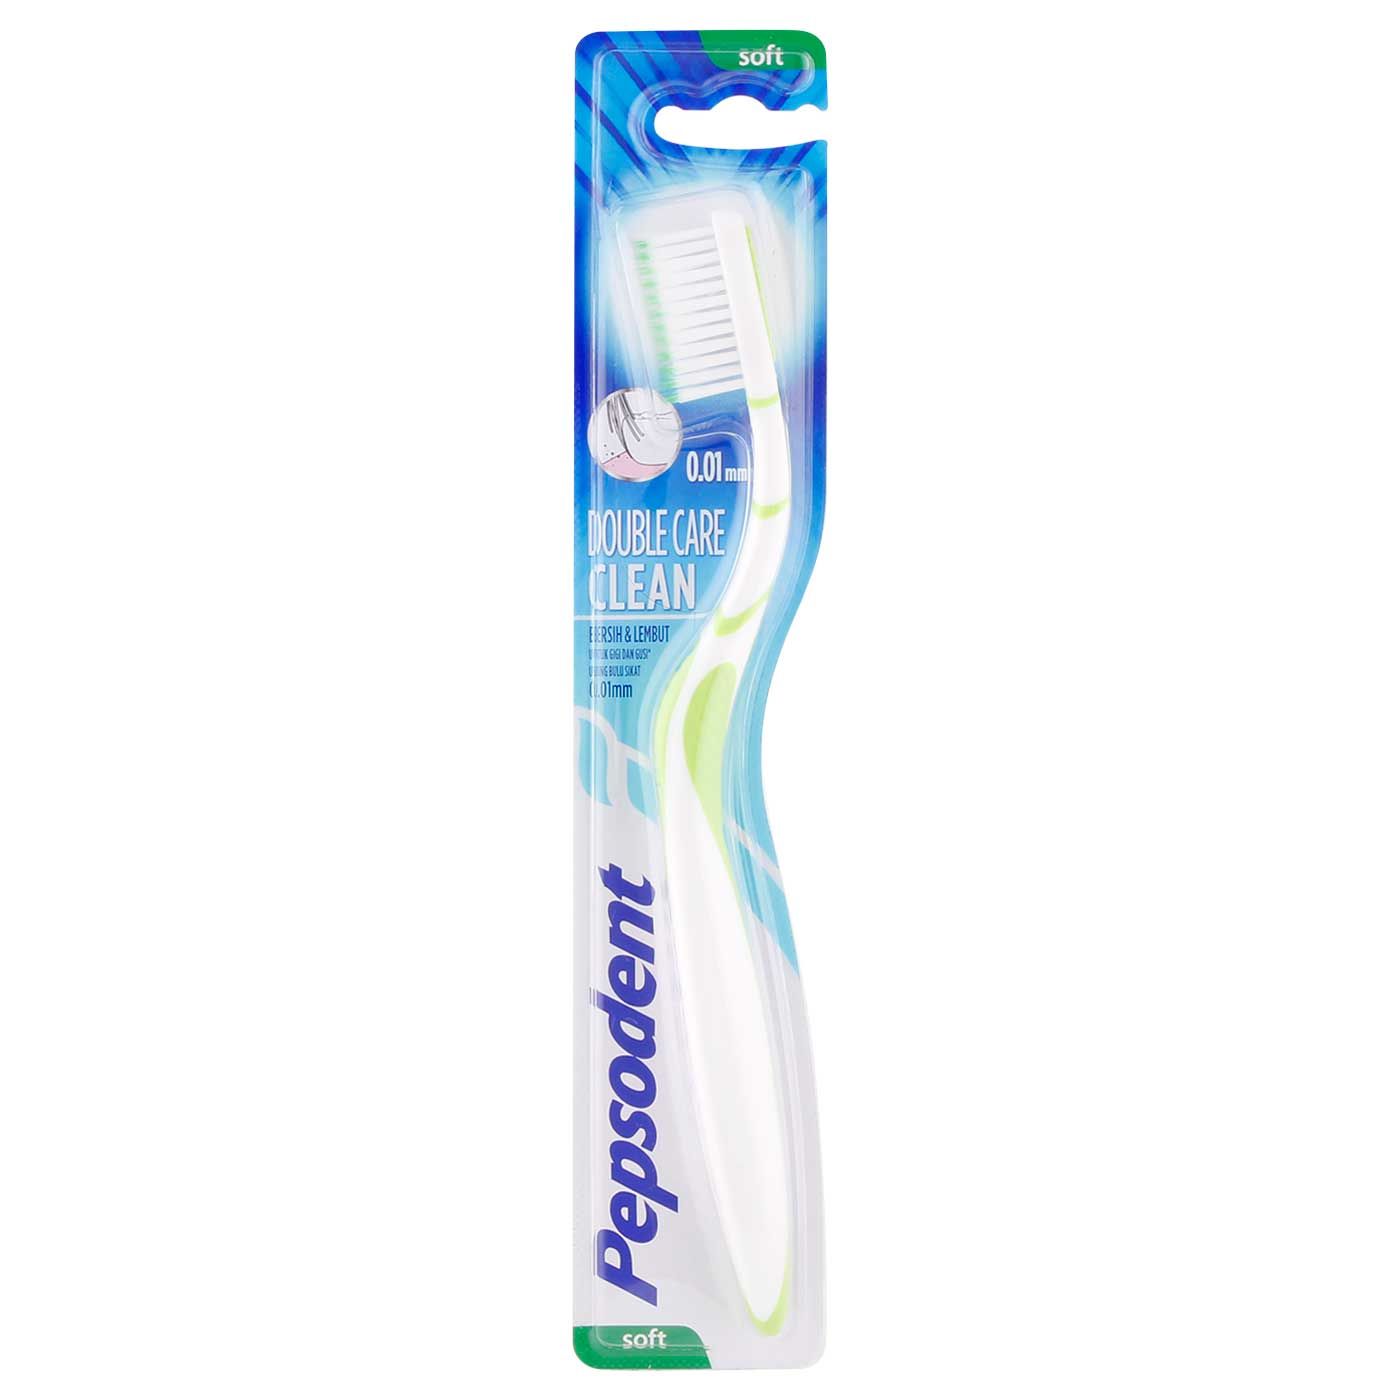 Pepsodent Tooth Brush Dbl Care Clean Soft Green - 1